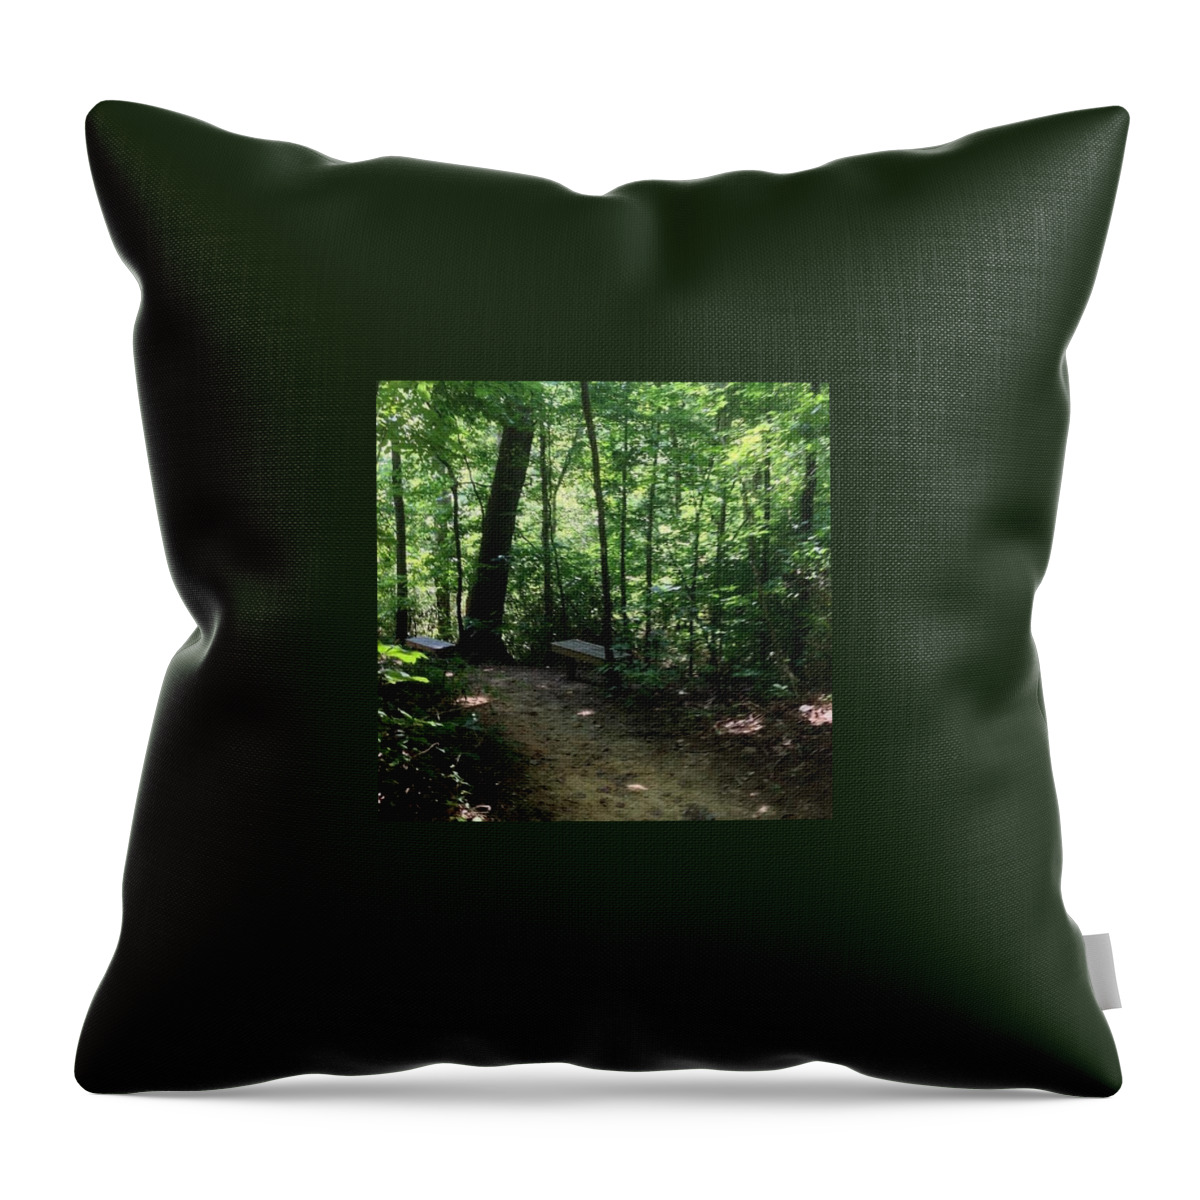  Throw Pillow featuring the photograph Rest Stop On A Hiking Trail by Daniel Eskridge